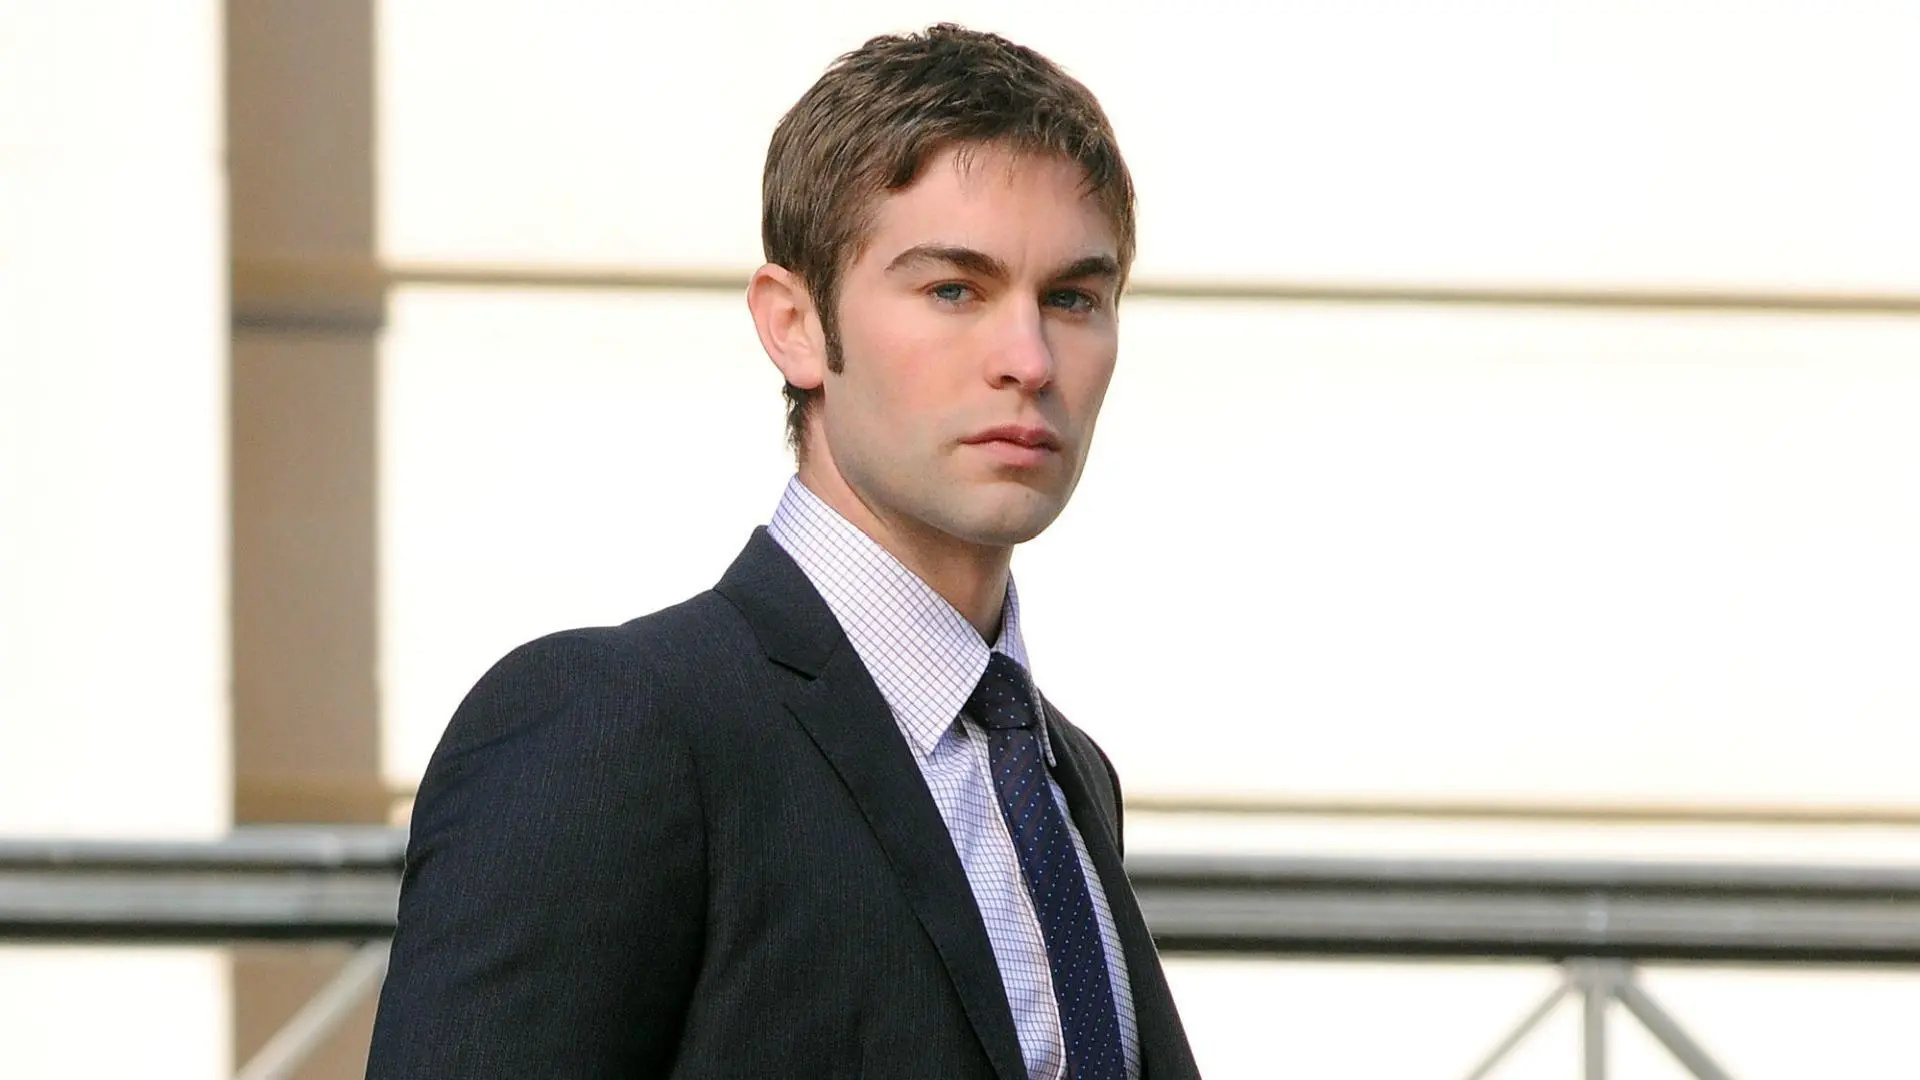 Chace Crawford, New profile update, Single life observer, Chace SheKnows, 1920x1080 Full HD Desktop